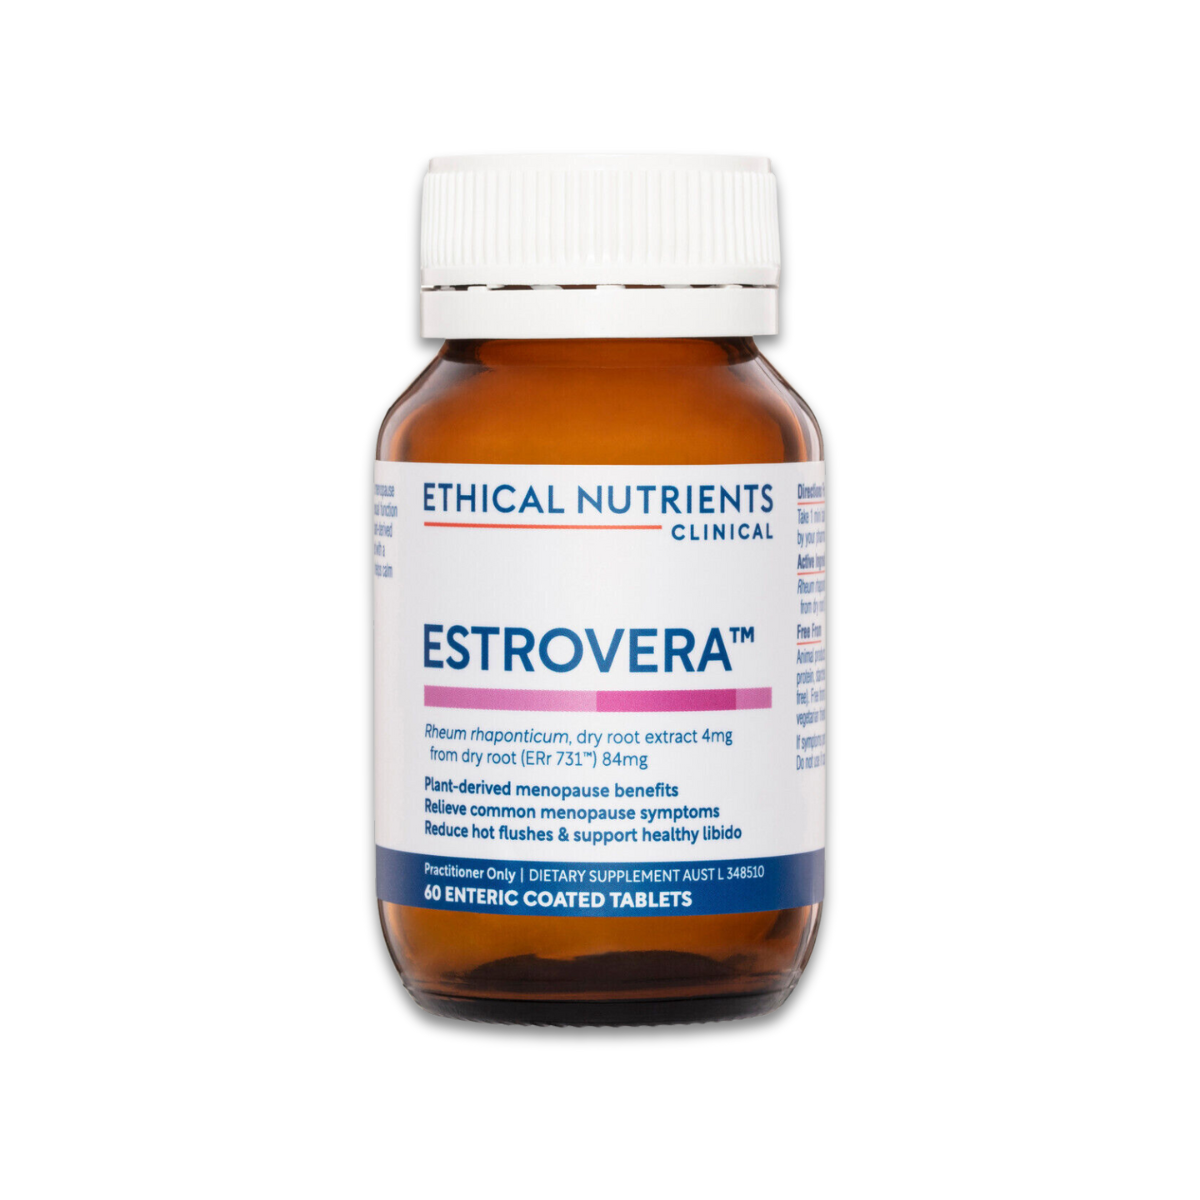 Ethical Nutrients Clinical Estrovera 60 Enteric Coated tablets